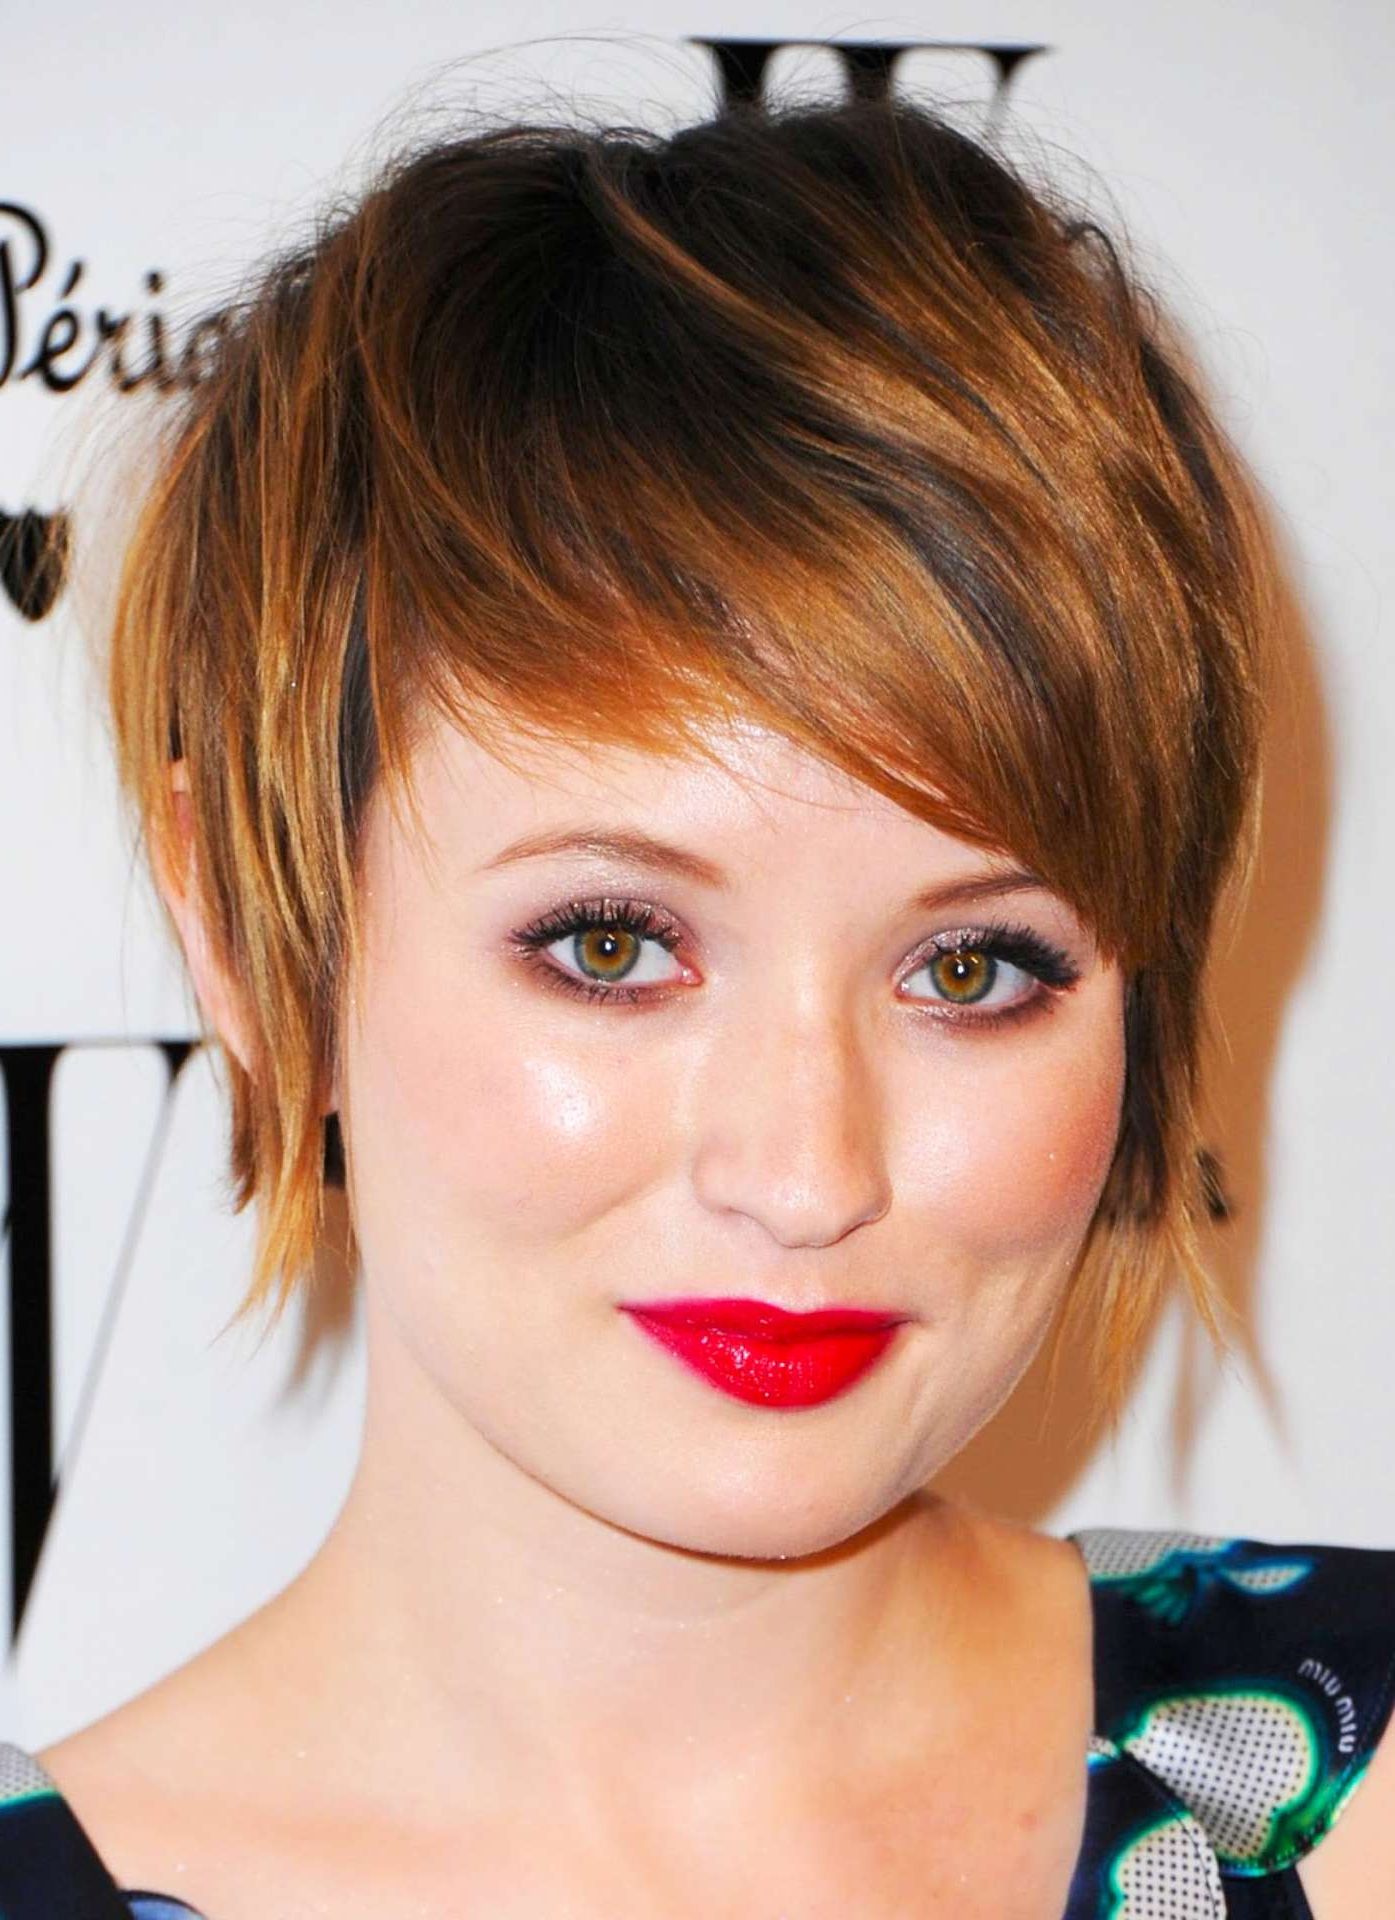 14 Best Short Haircuts For Women With Round Faces With Regard To Short Haircuts For Round Faces And Glasses (View 6 of 25)